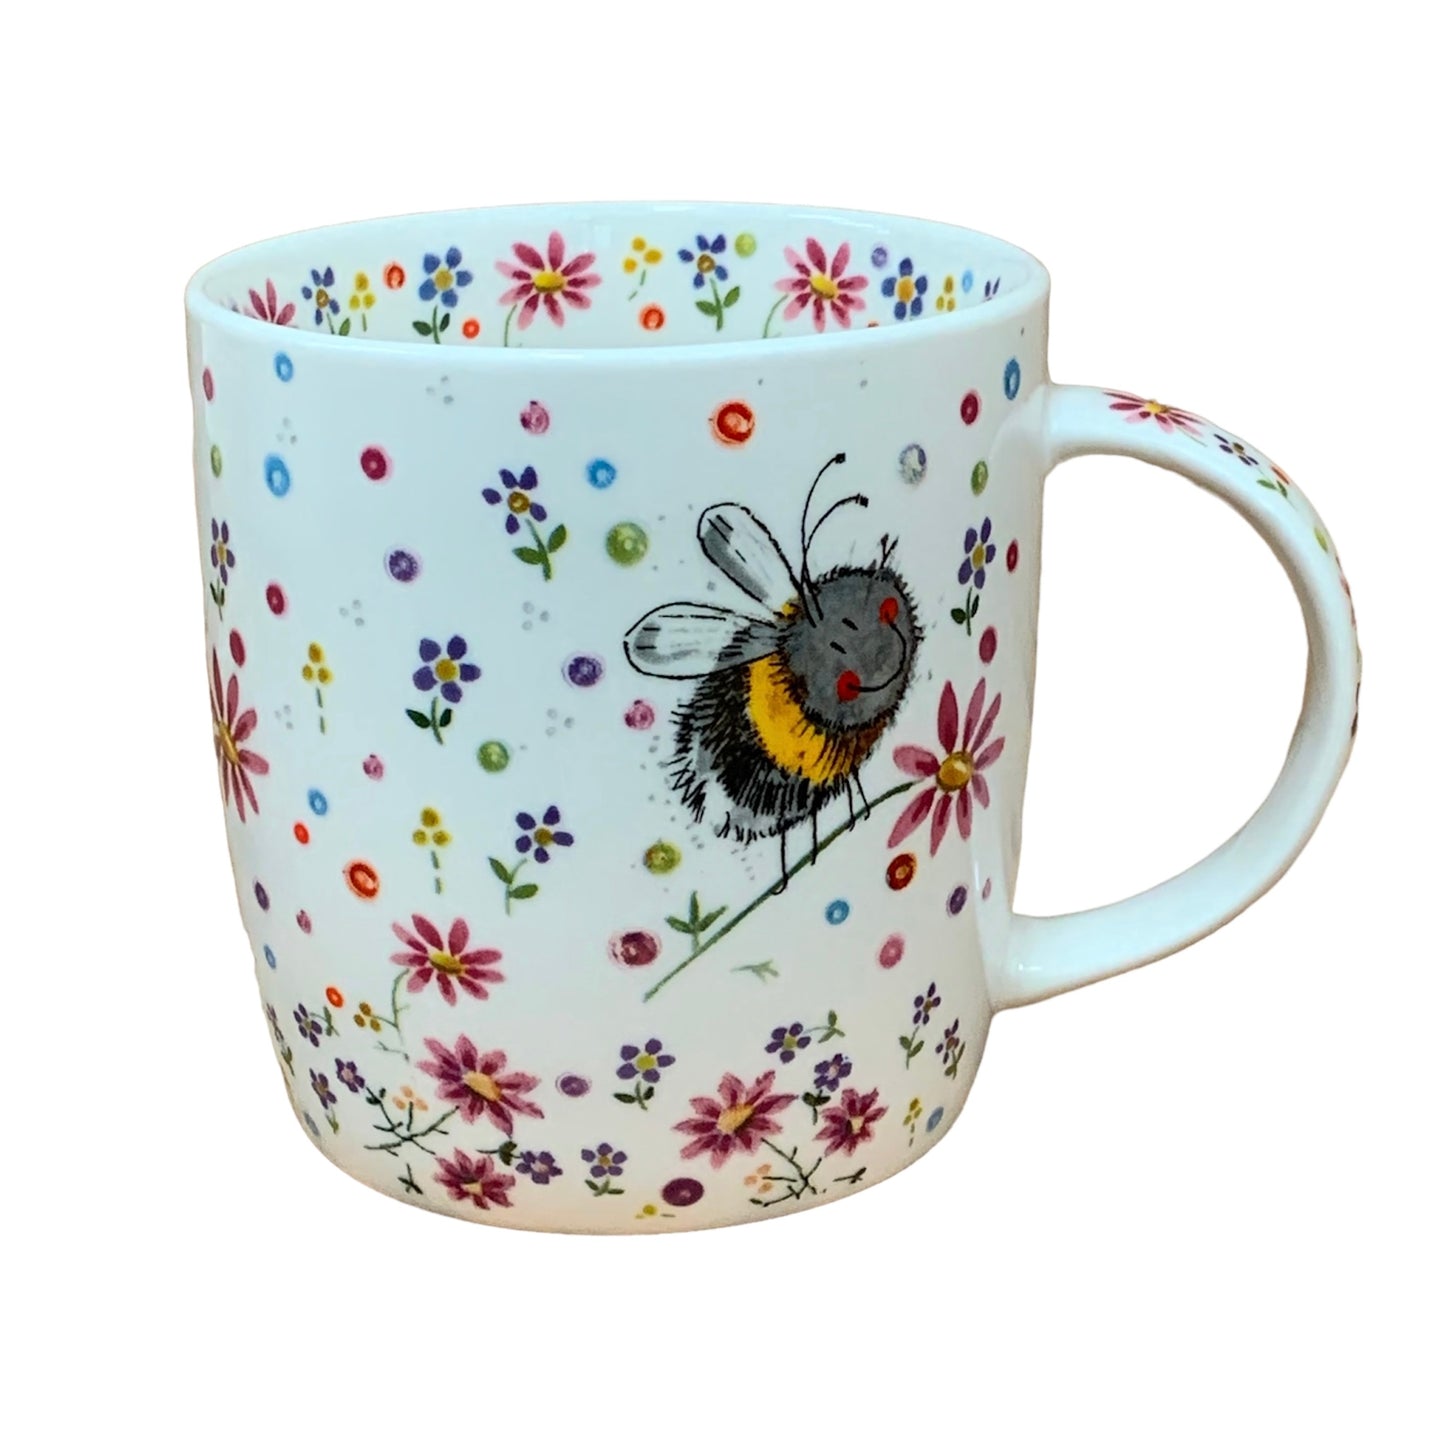 Alex Clark mug is illustrated with a beautiful happy bee in amongst a meadow of flowers.